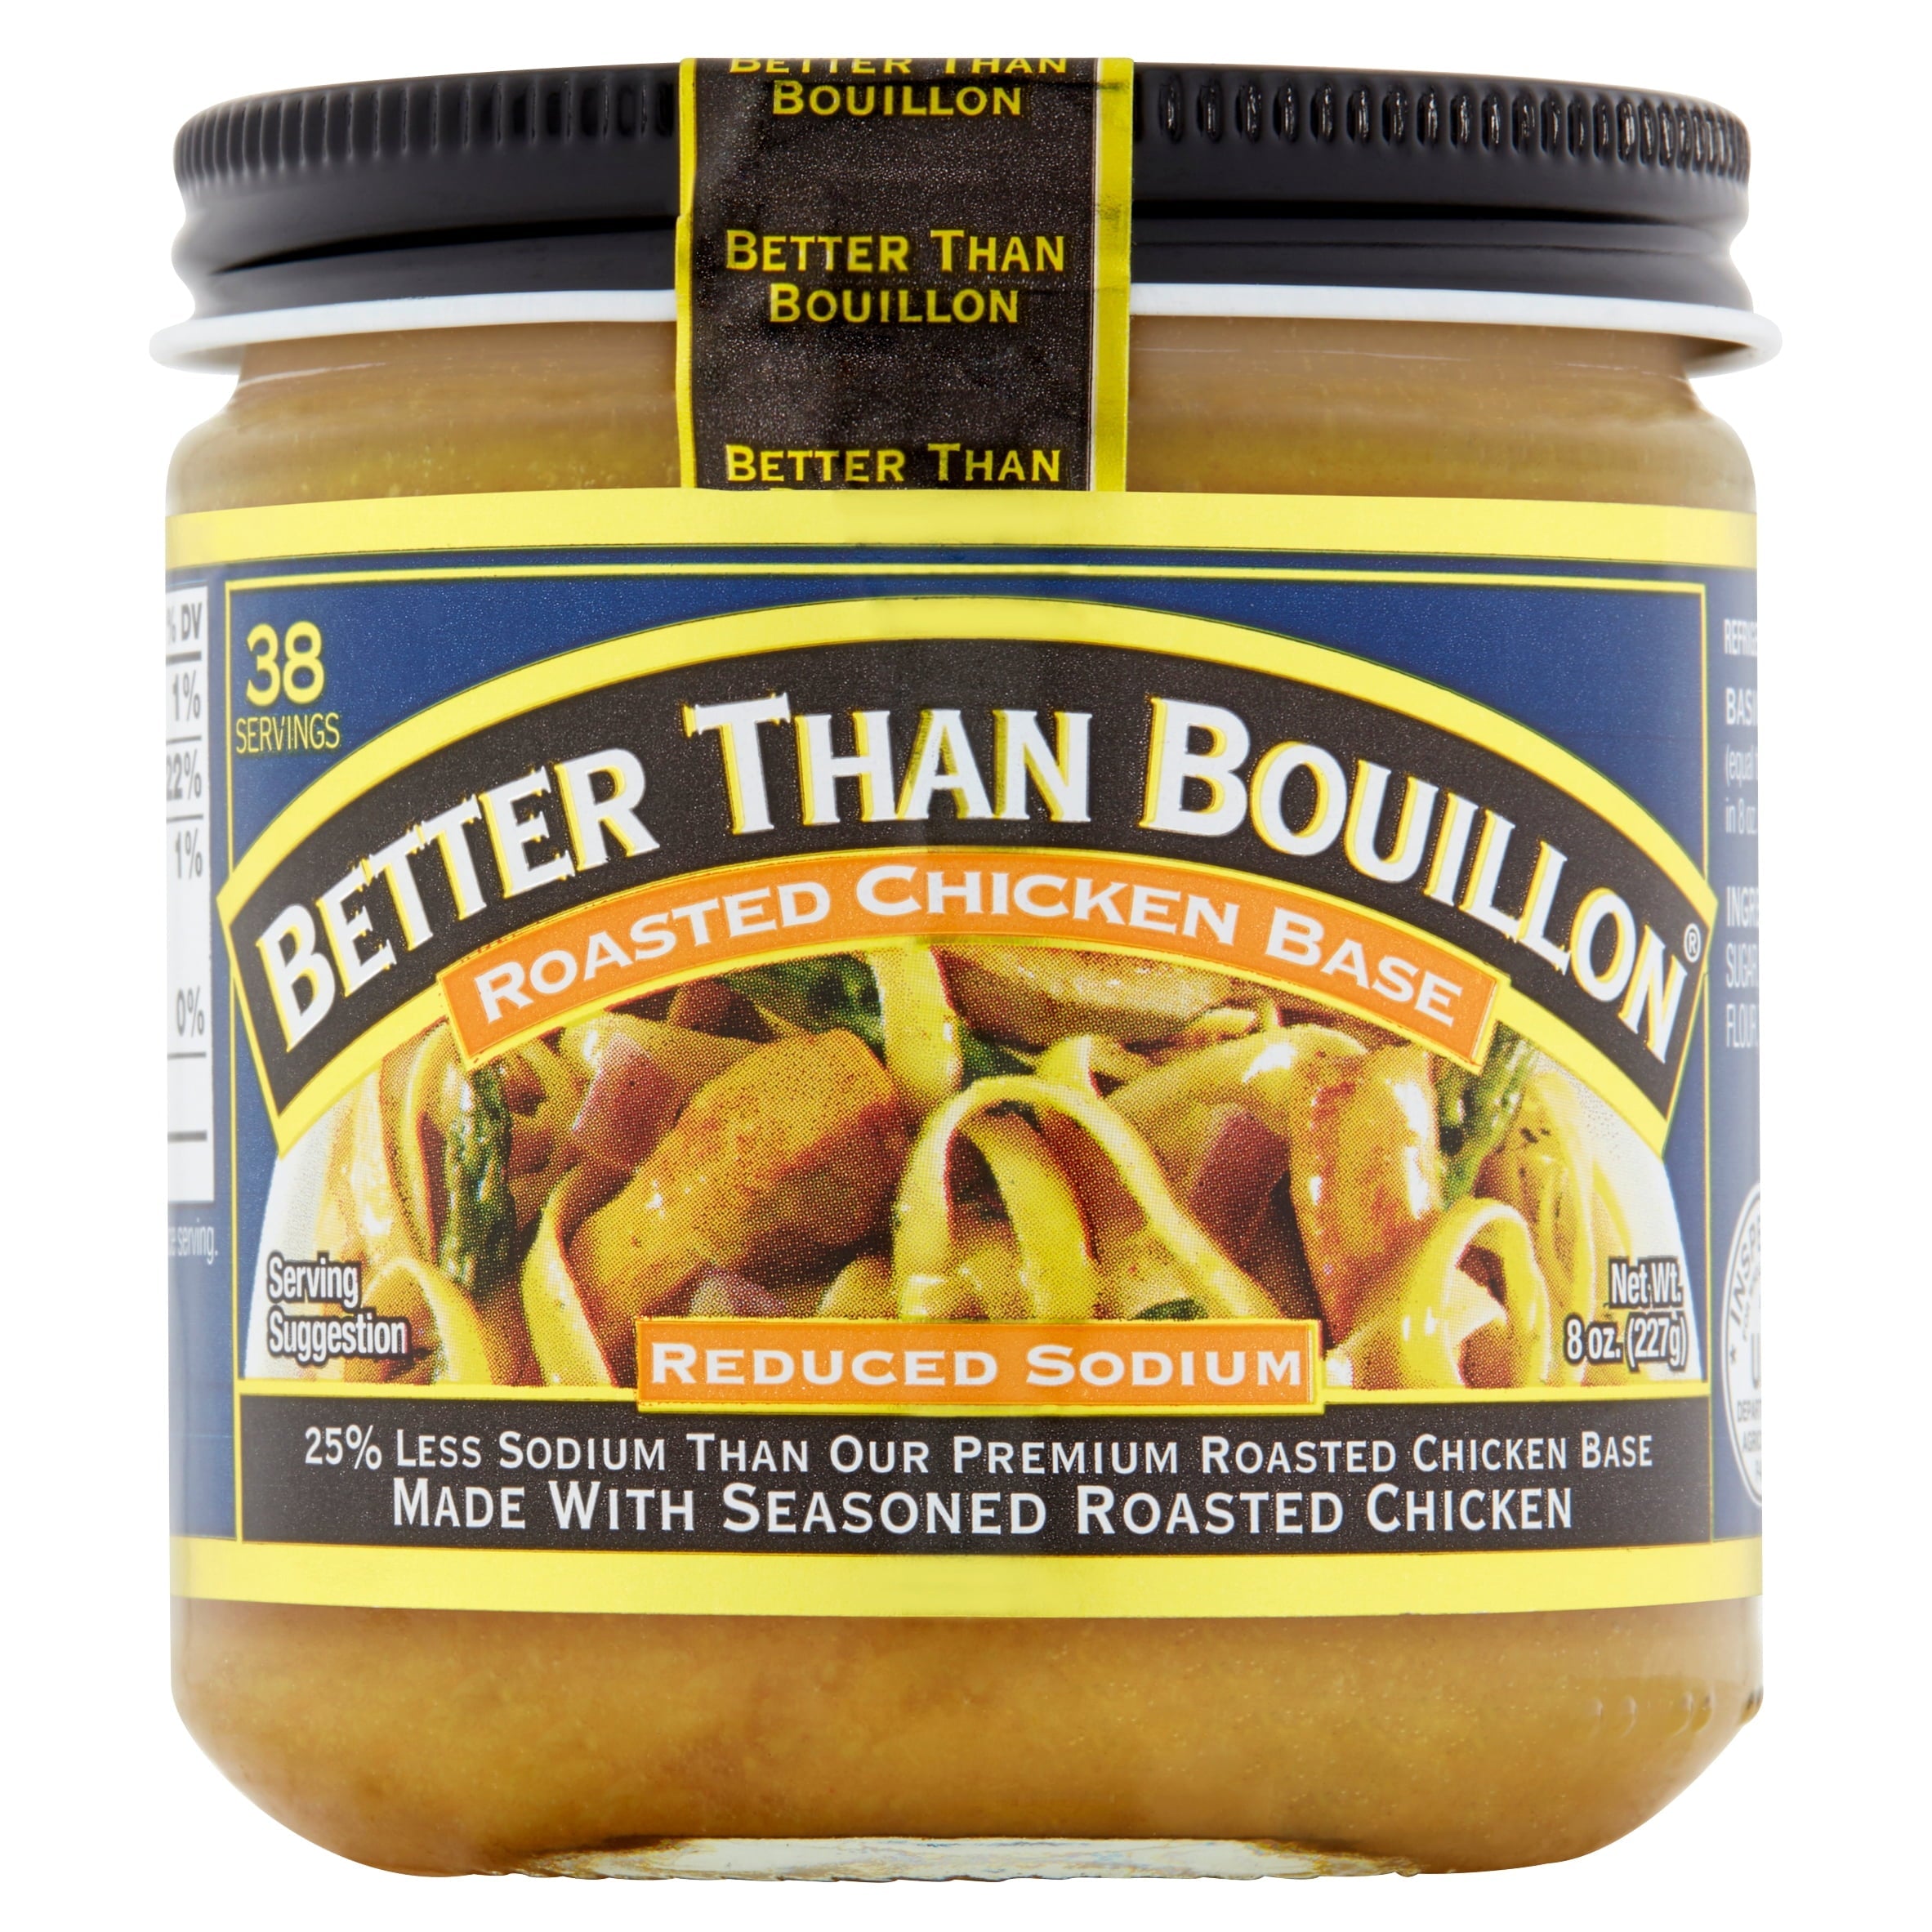 Better Than Bouillon Base Chicken with Reduced Sodium 8 oz Bag